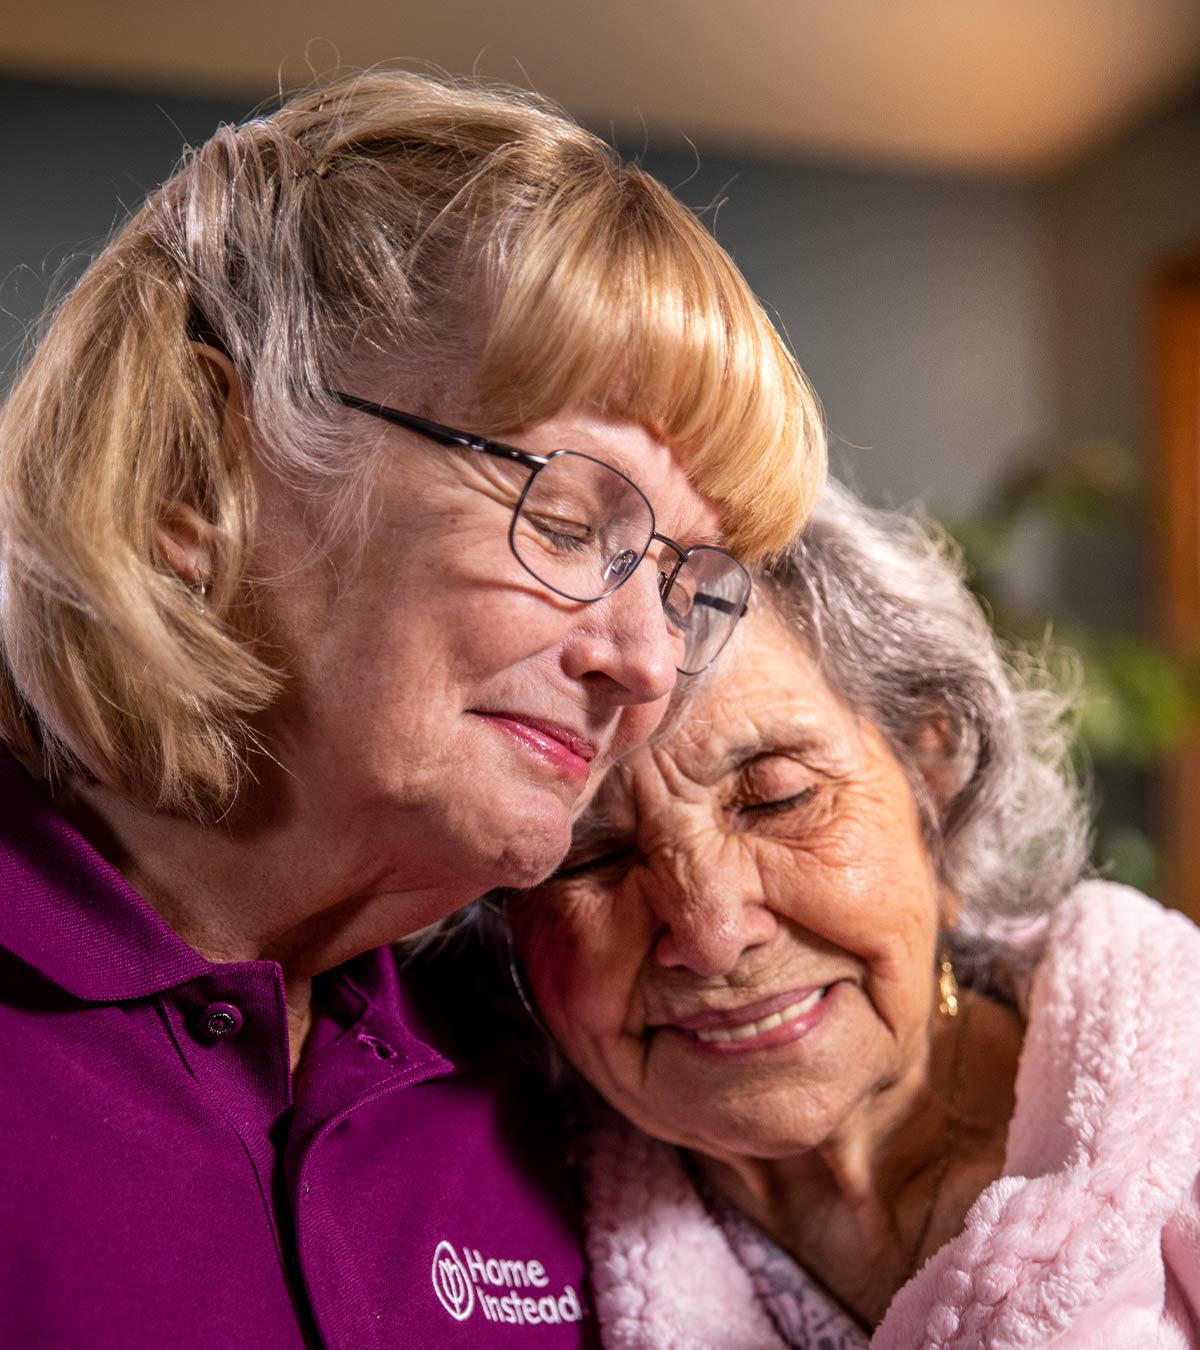 CAREGiver providing in-home senior care services. Home Instead of Lubbock, TX provides Elder Care to aging adults. 